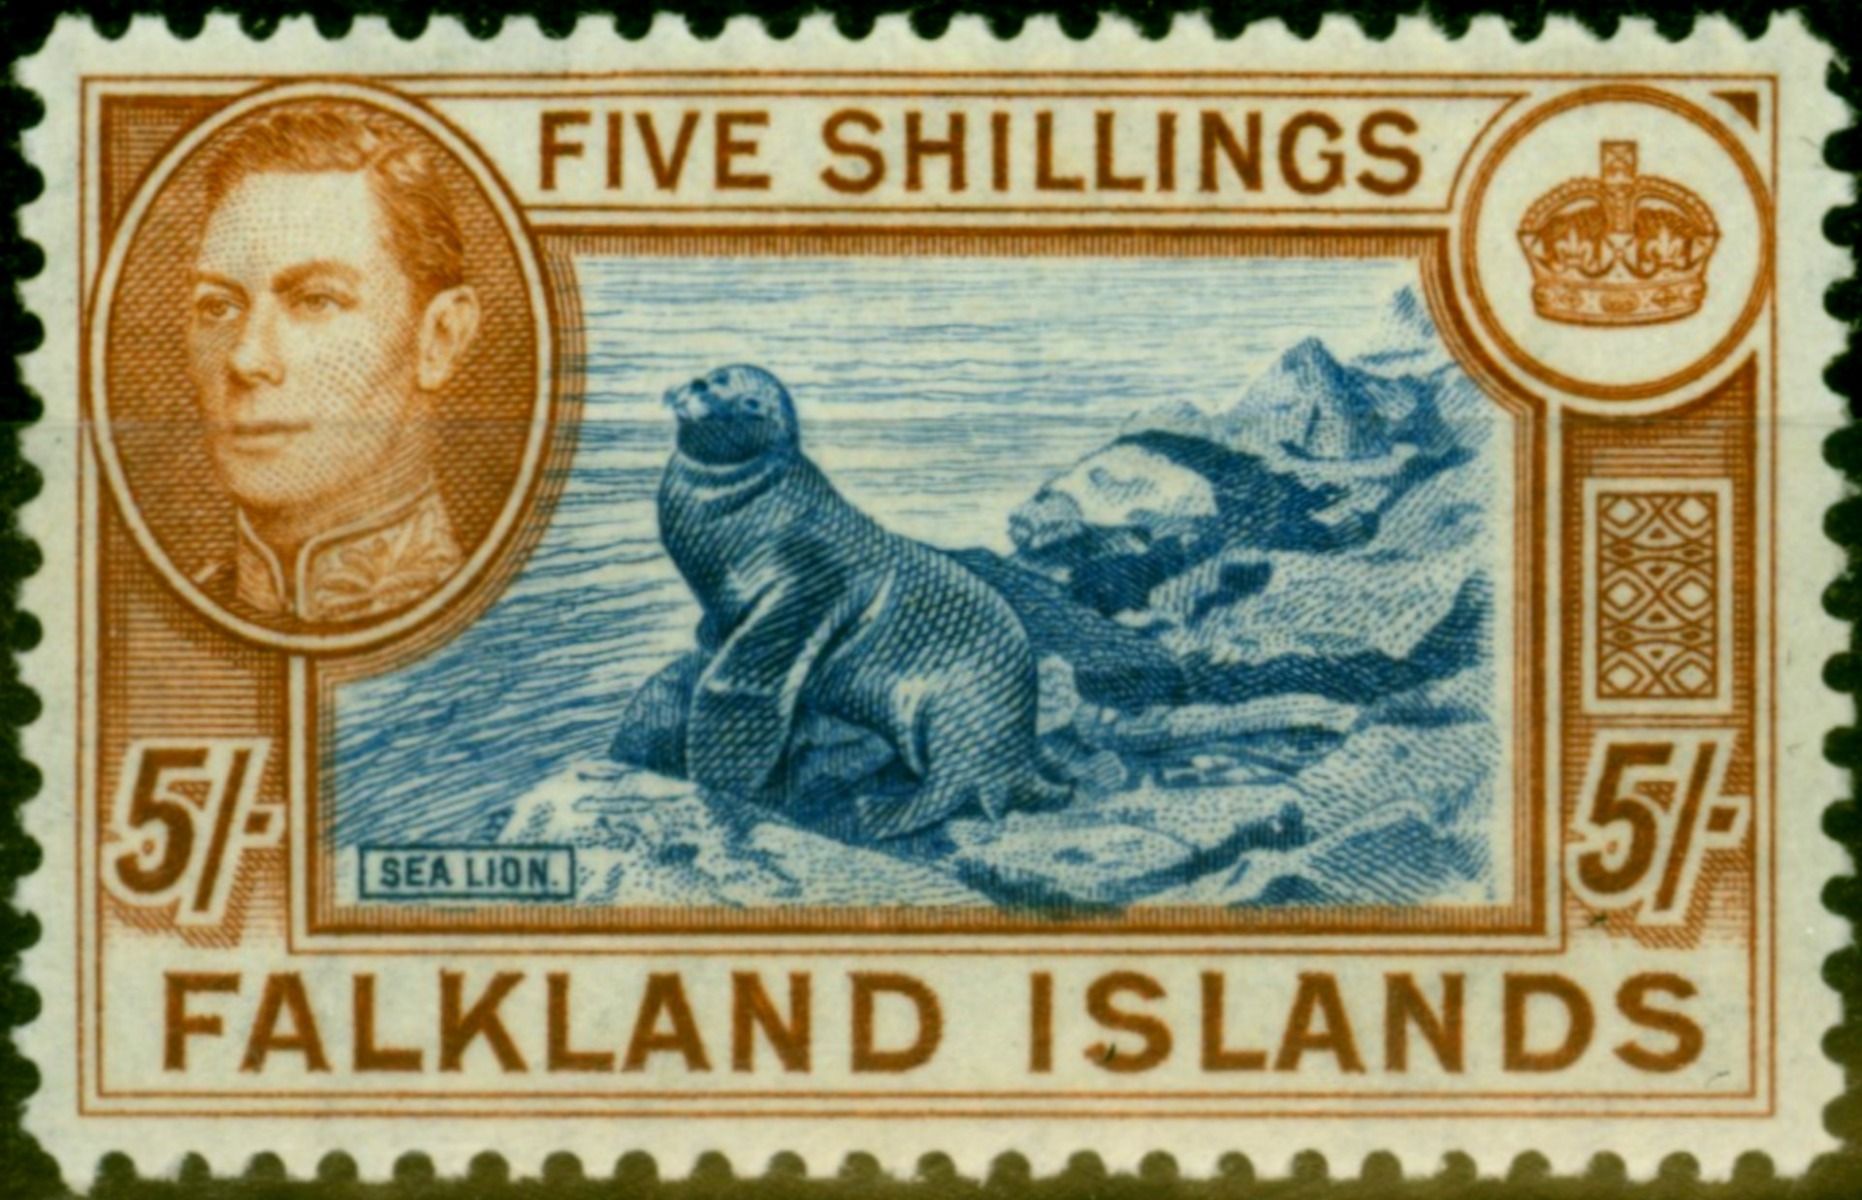 Falkland Islands 1950 SG161d 5s steel blue & buff brown thin paper used 